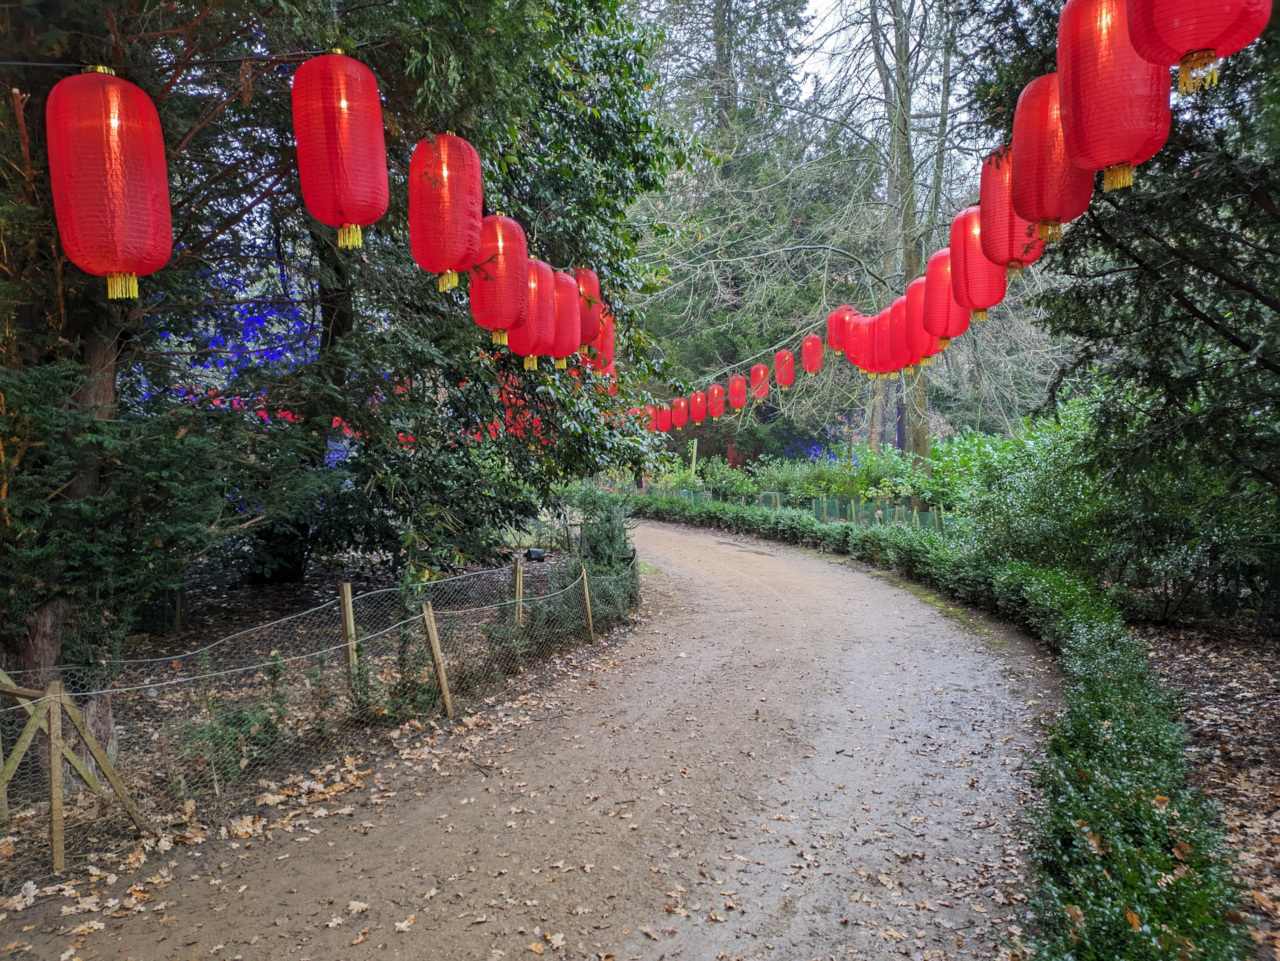 Footpath within woodlands with lit-up red lanterns.